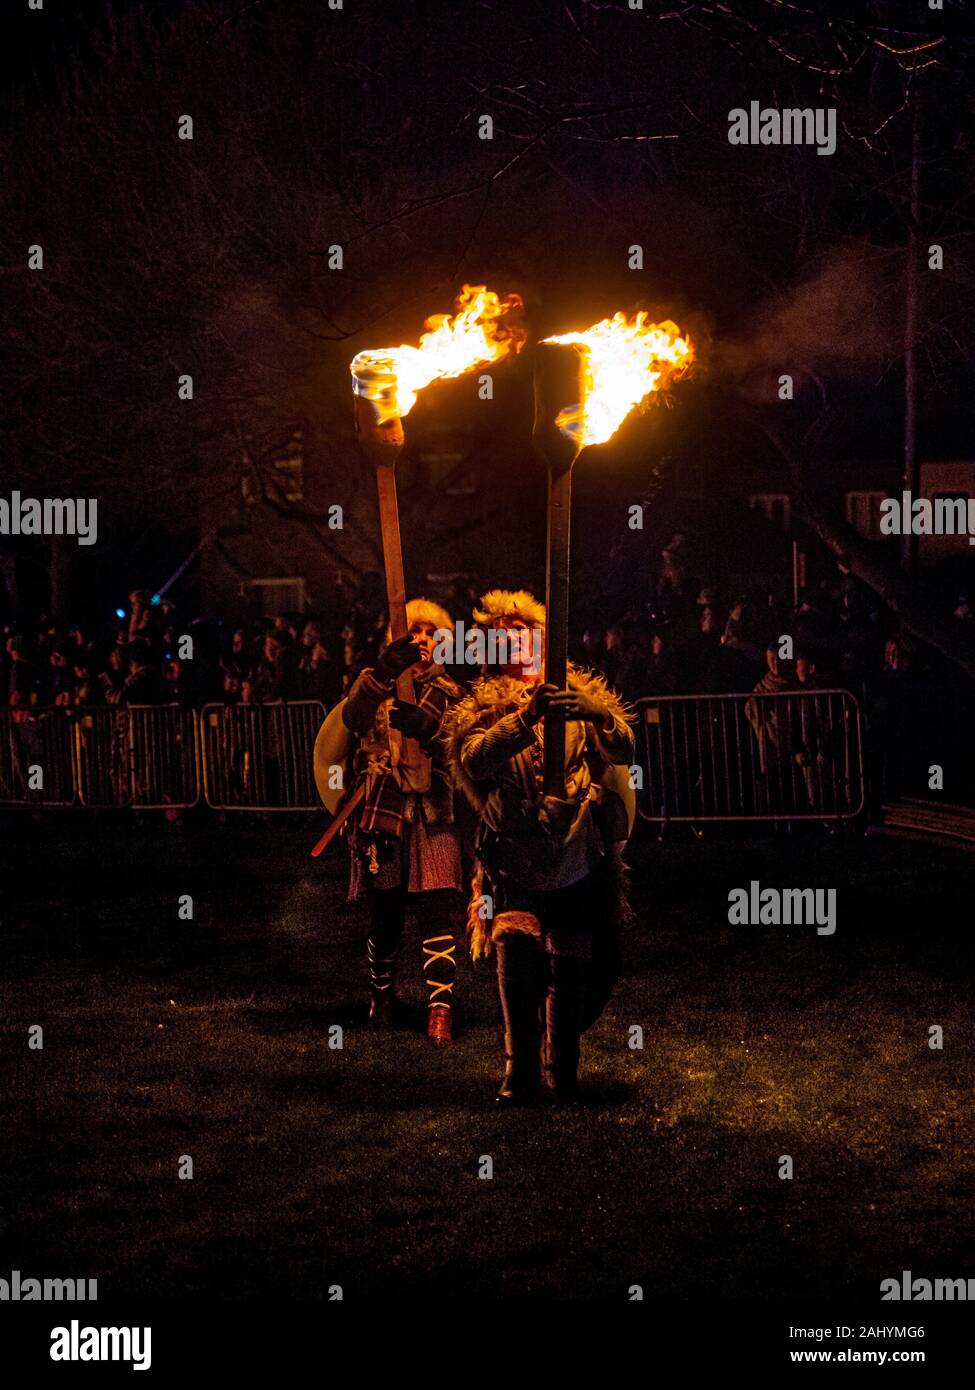 Flamborough Fire Festival. New Year's Eve 2019 celebrating the village connection with Viking History. Featuring the Flamborough Fireballs, Torchlit Procession and burning of a Viking Longboat on the village green. Stock Photo